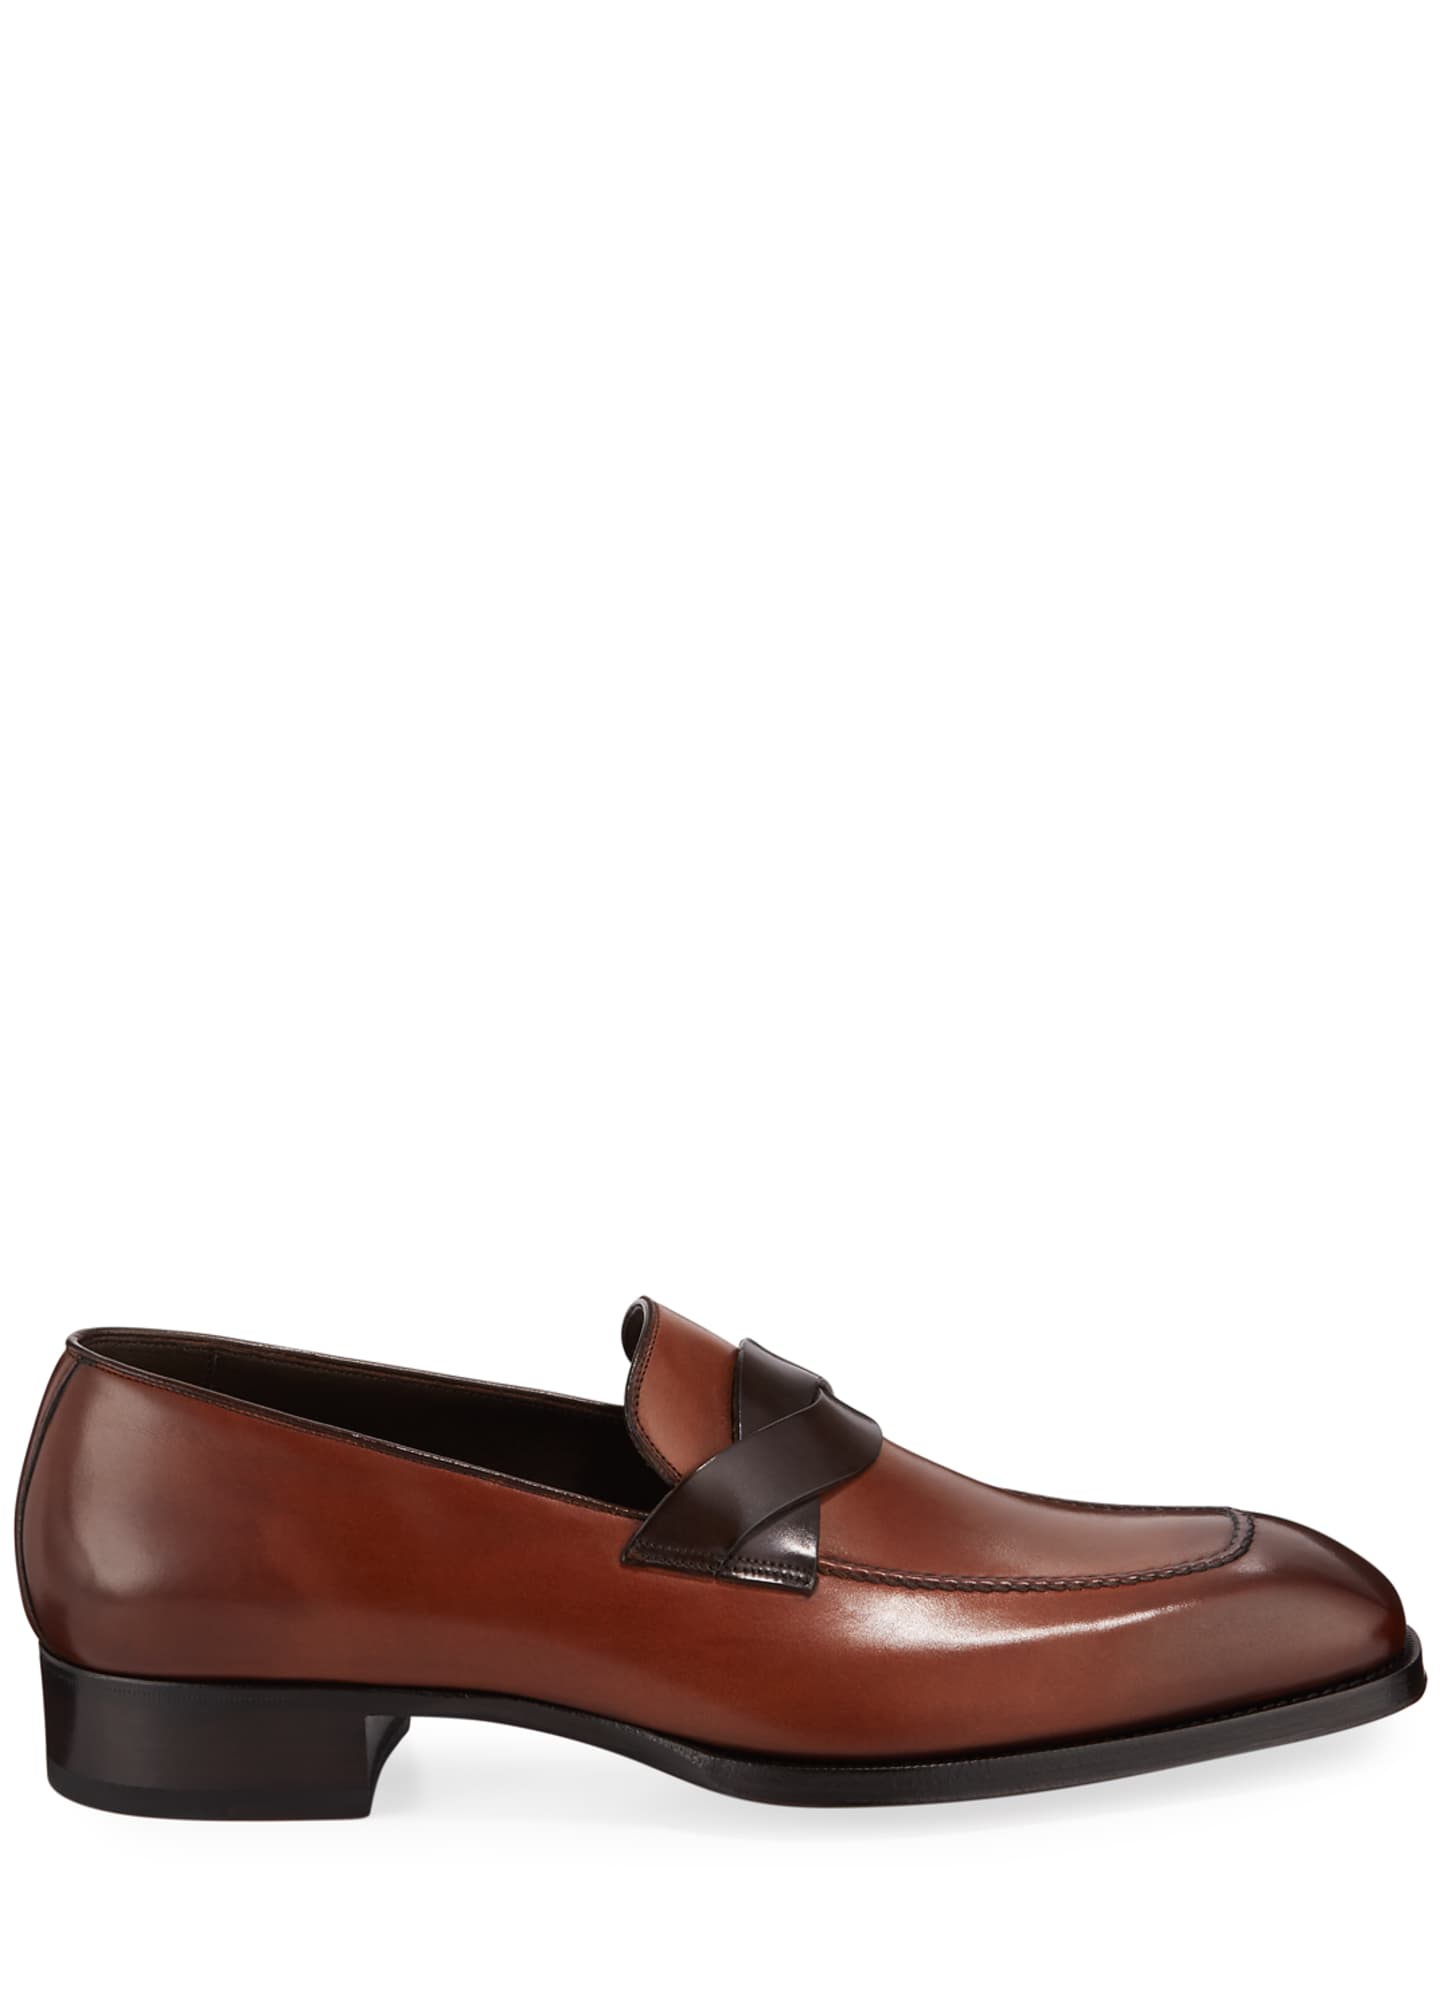 TOM FORD Men's Elkan Twisted-Keeper Leather Loafers - Bergdorf Goodman